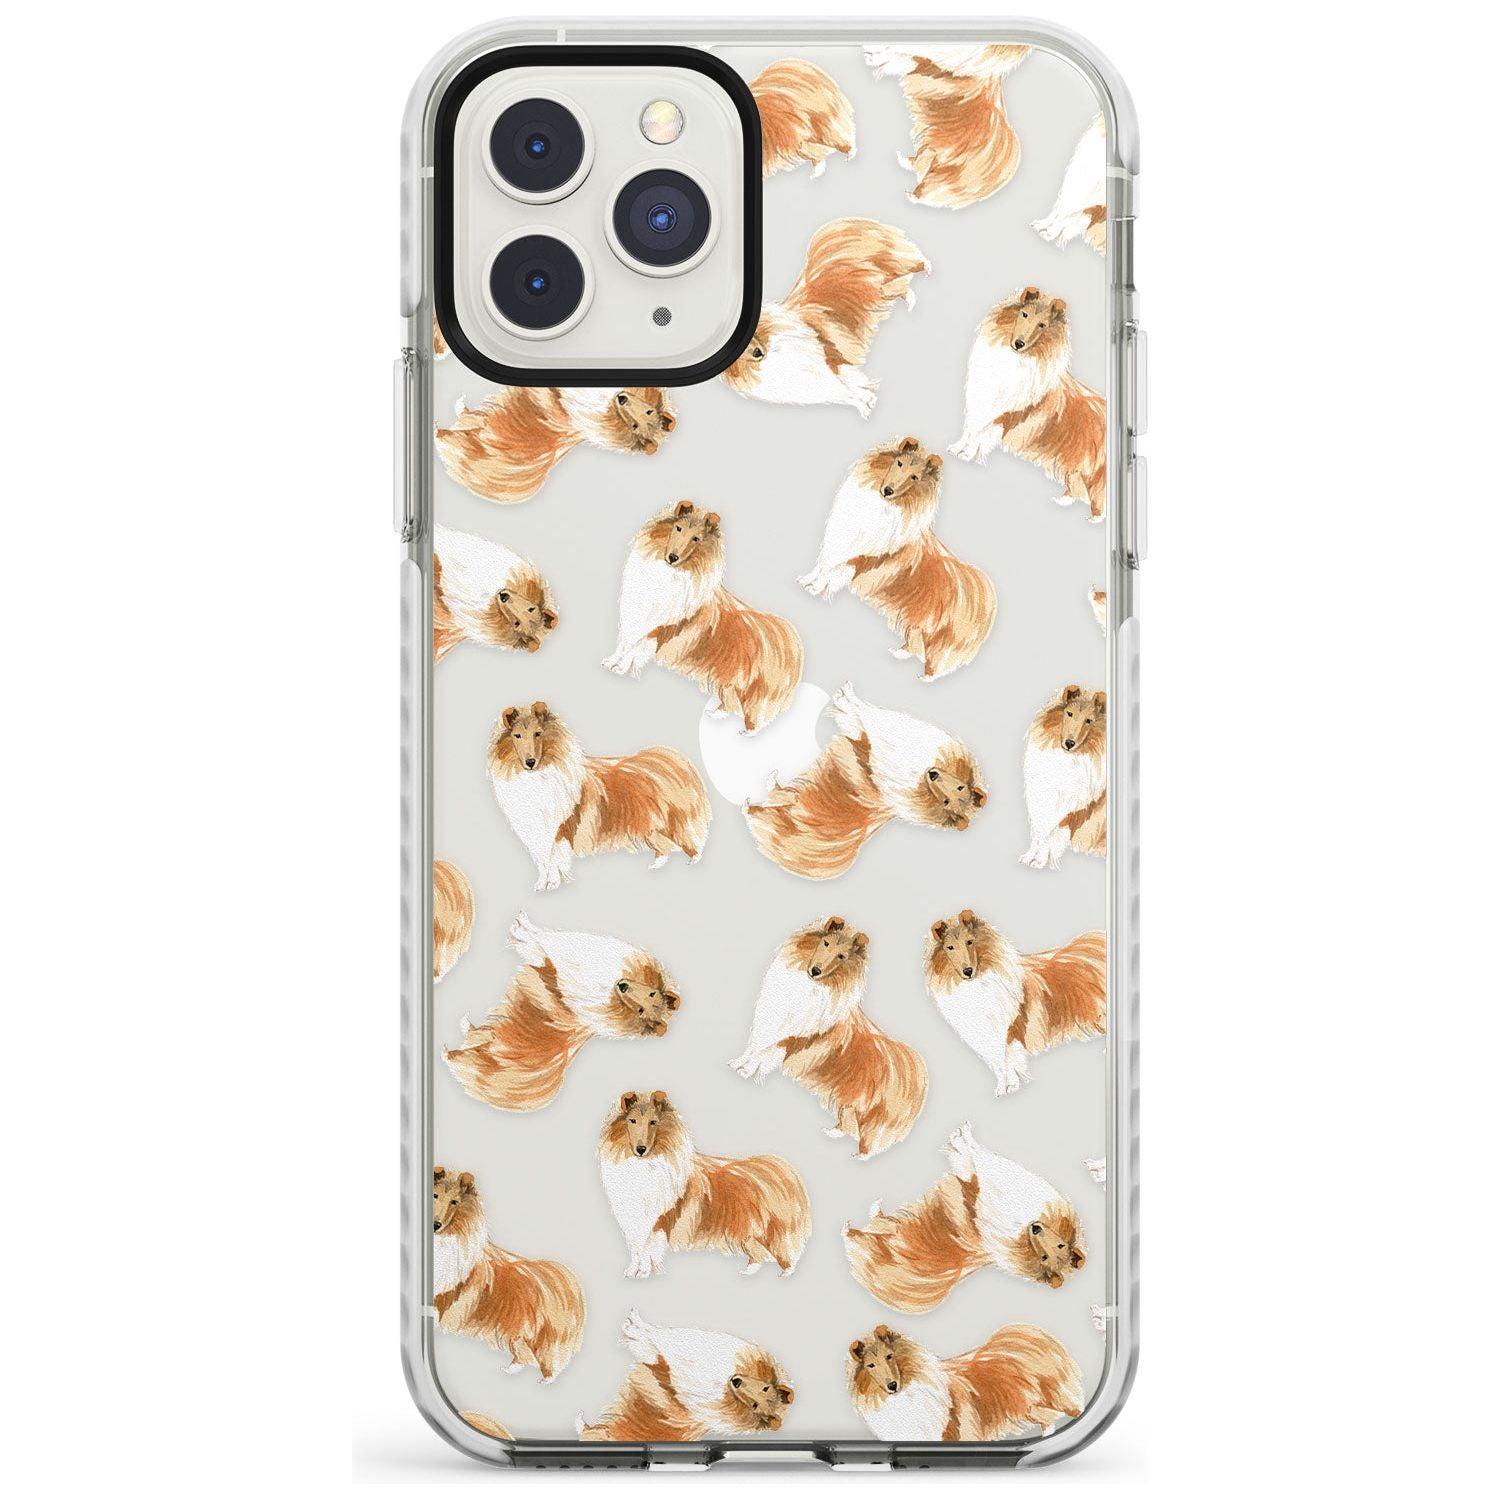 Rough Collie Watercolour Dog Pattern Impact Phone Case for iPhone 11 Pro Max